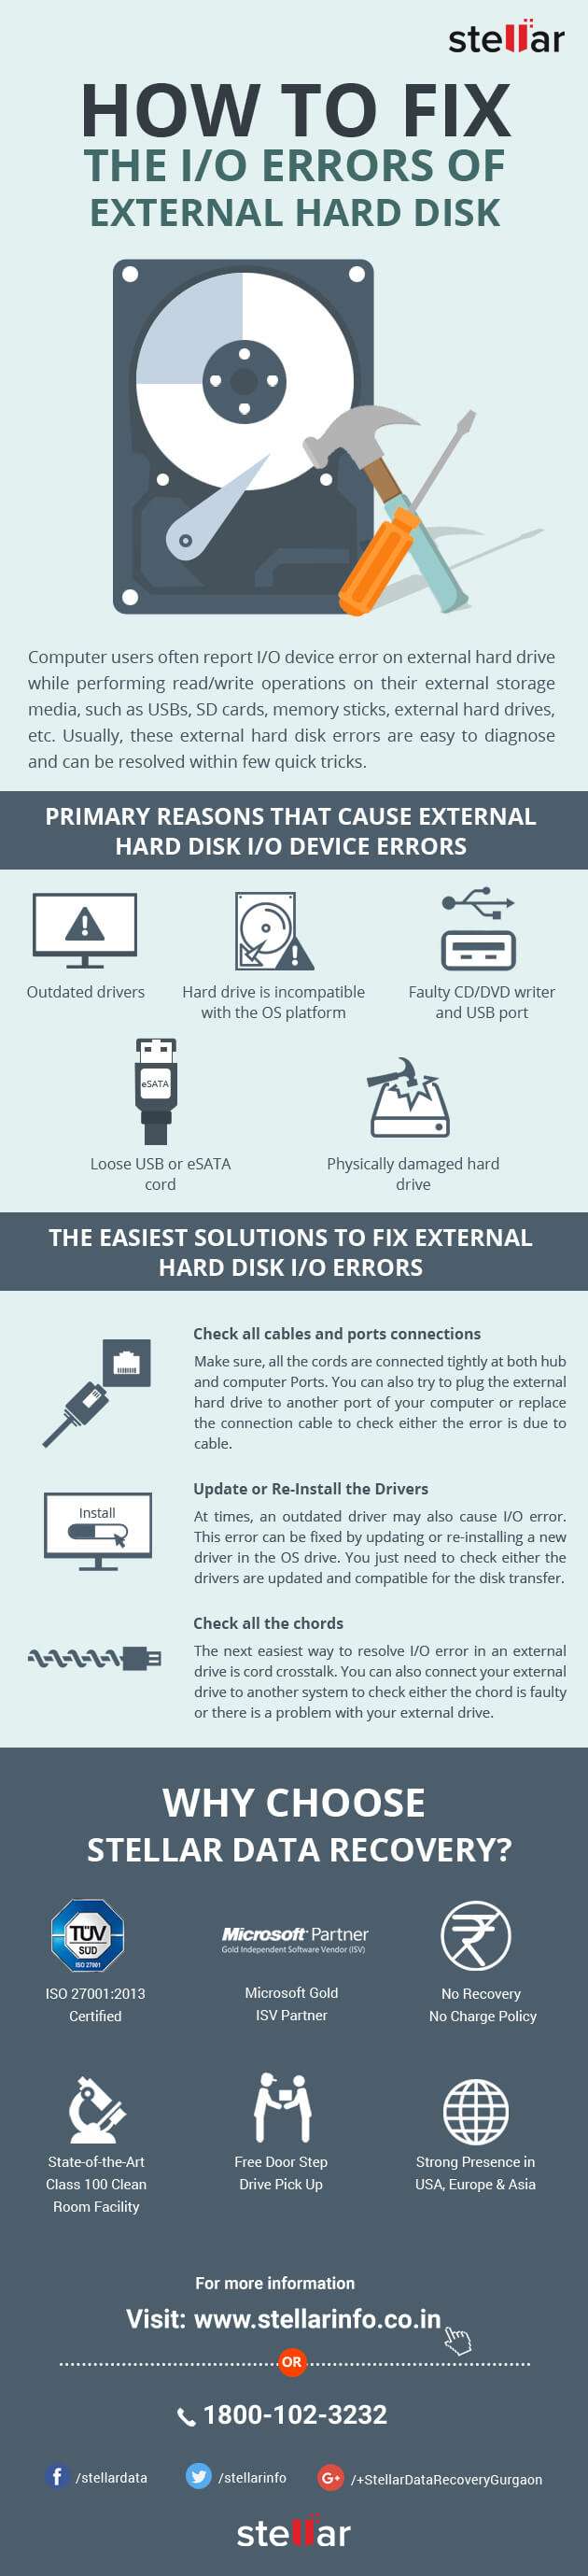 How to fix Hard Disk I/O Errors infographic